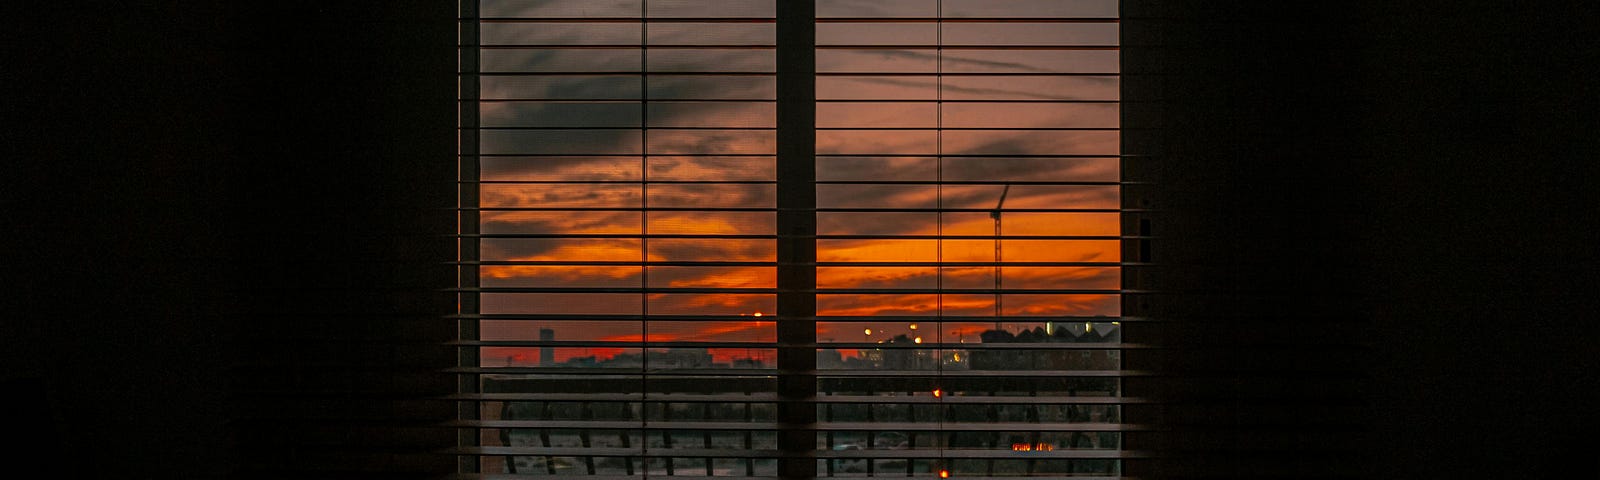 Crumpled blanket in dark room at sunset. The city and the orange sky can be seen through the blinds on the window.